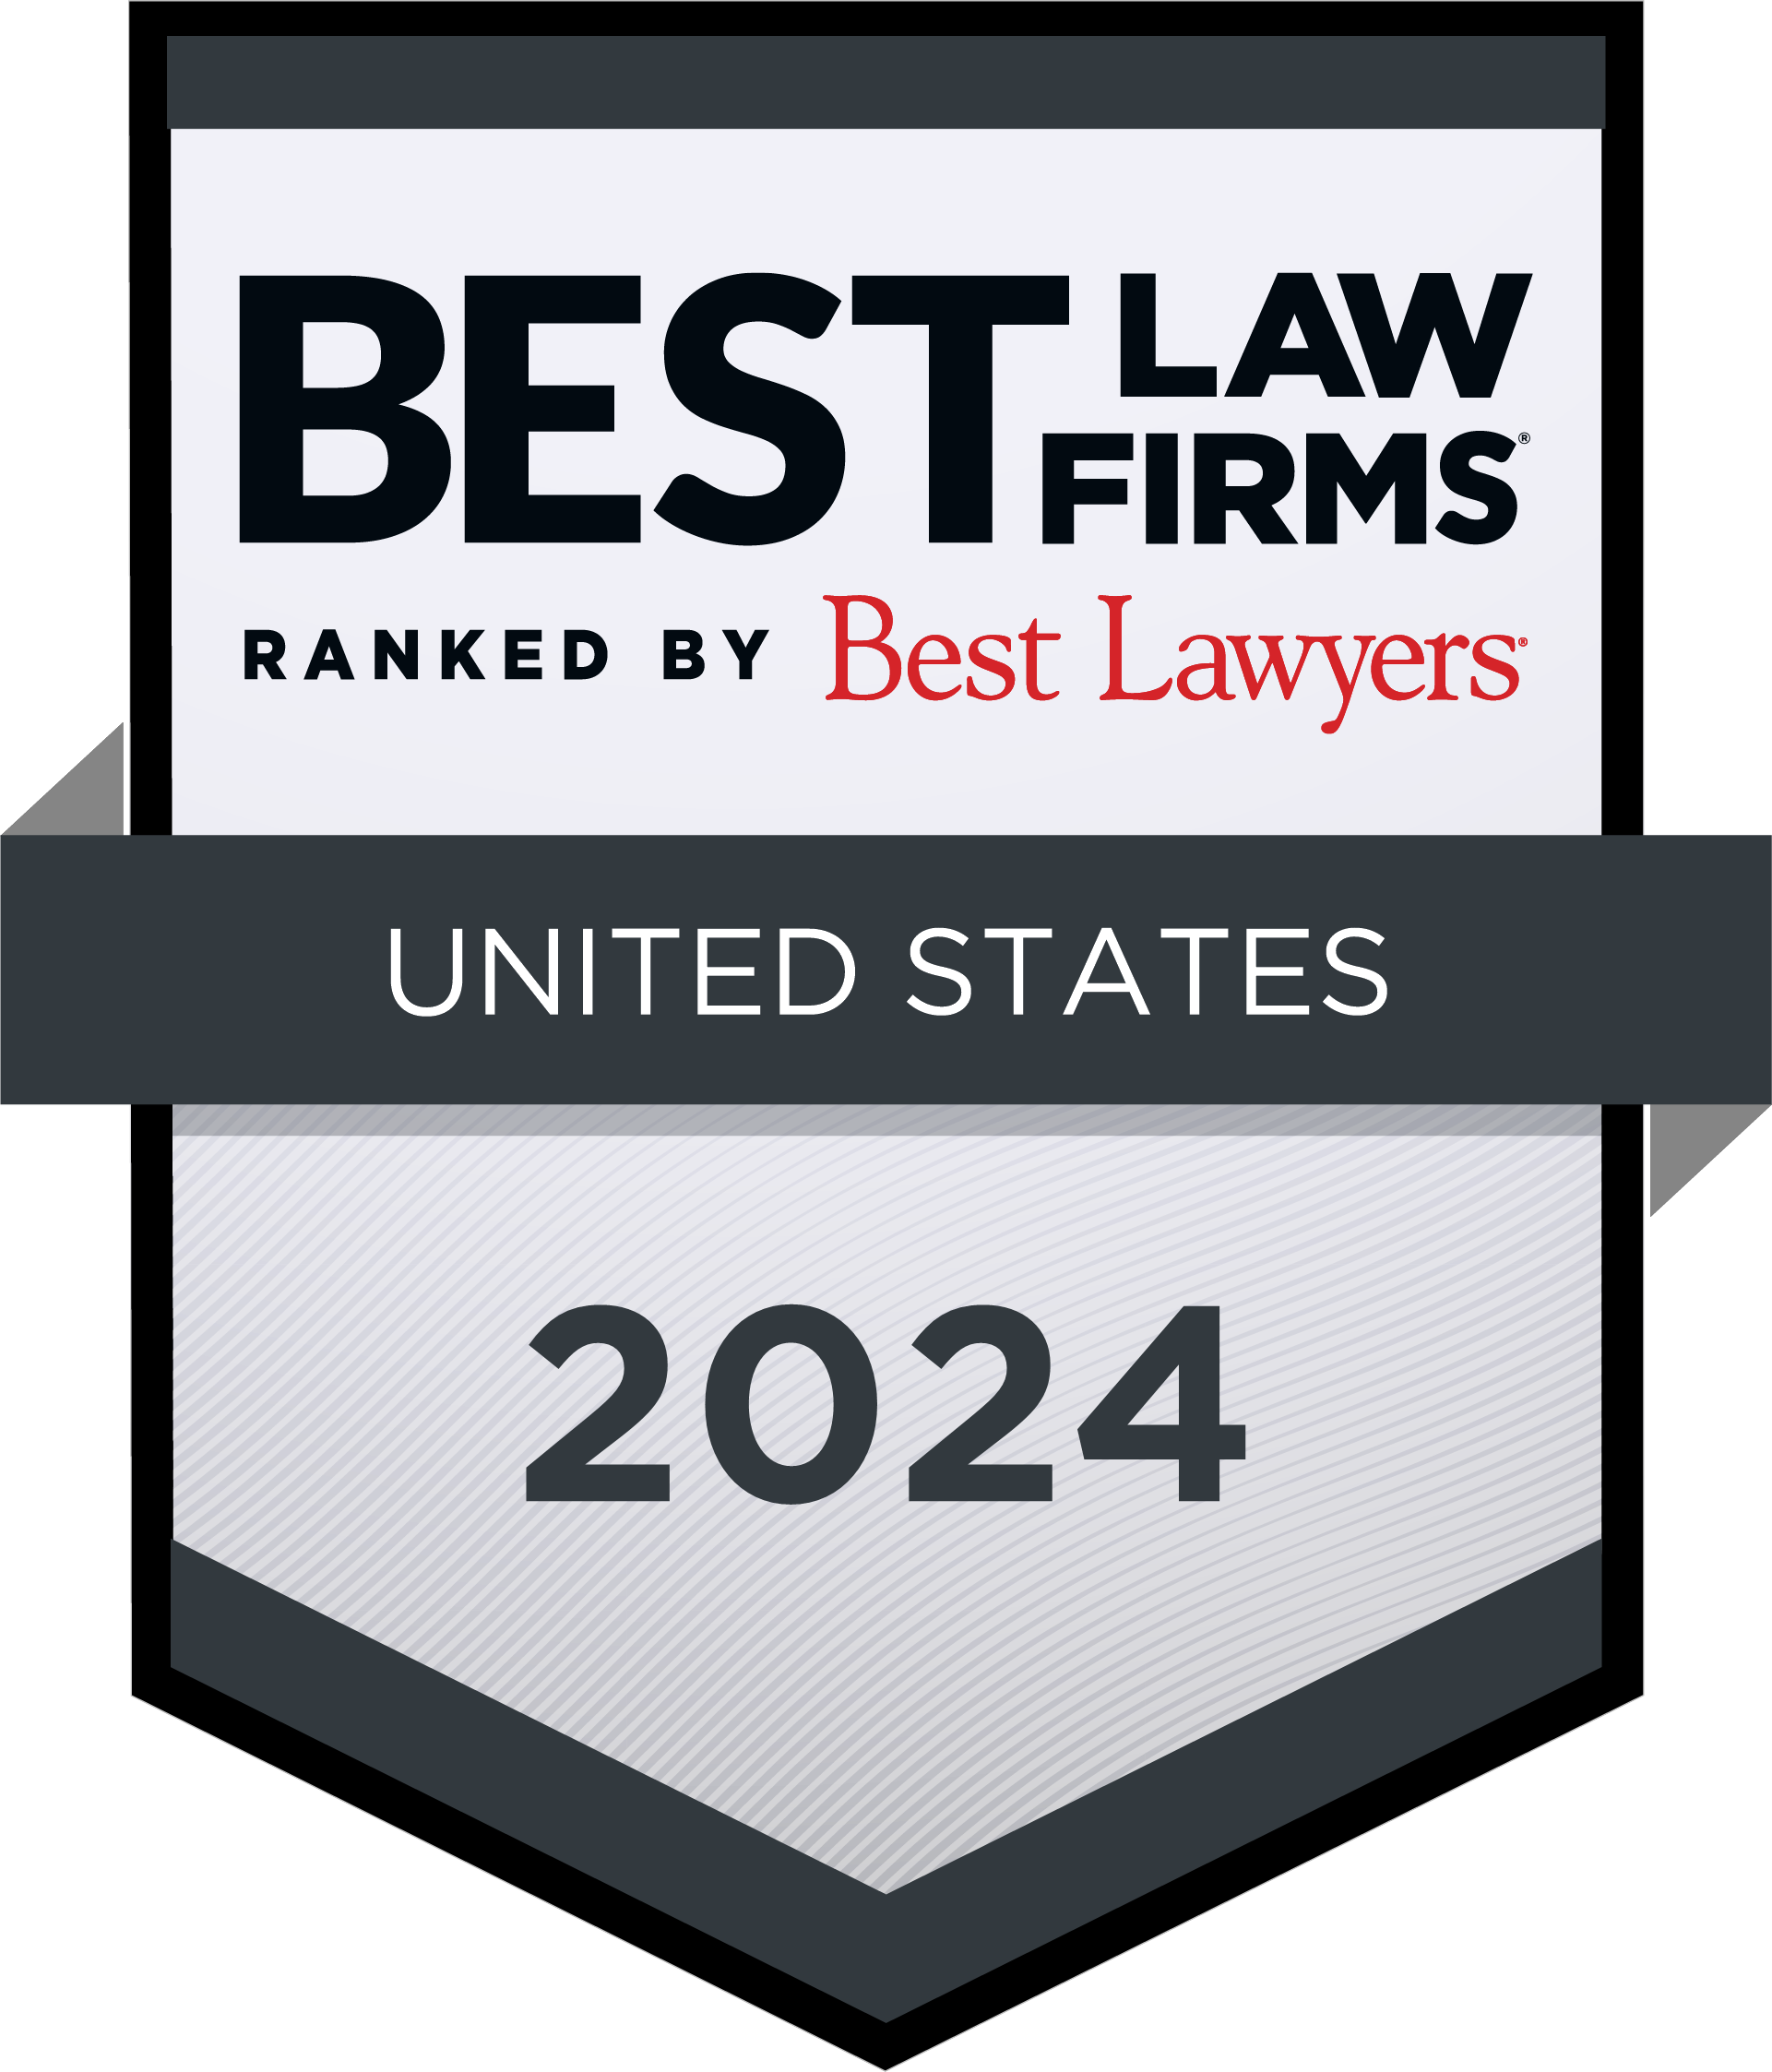 Wanta Thome is recognized as a Best Law Firm in 2024